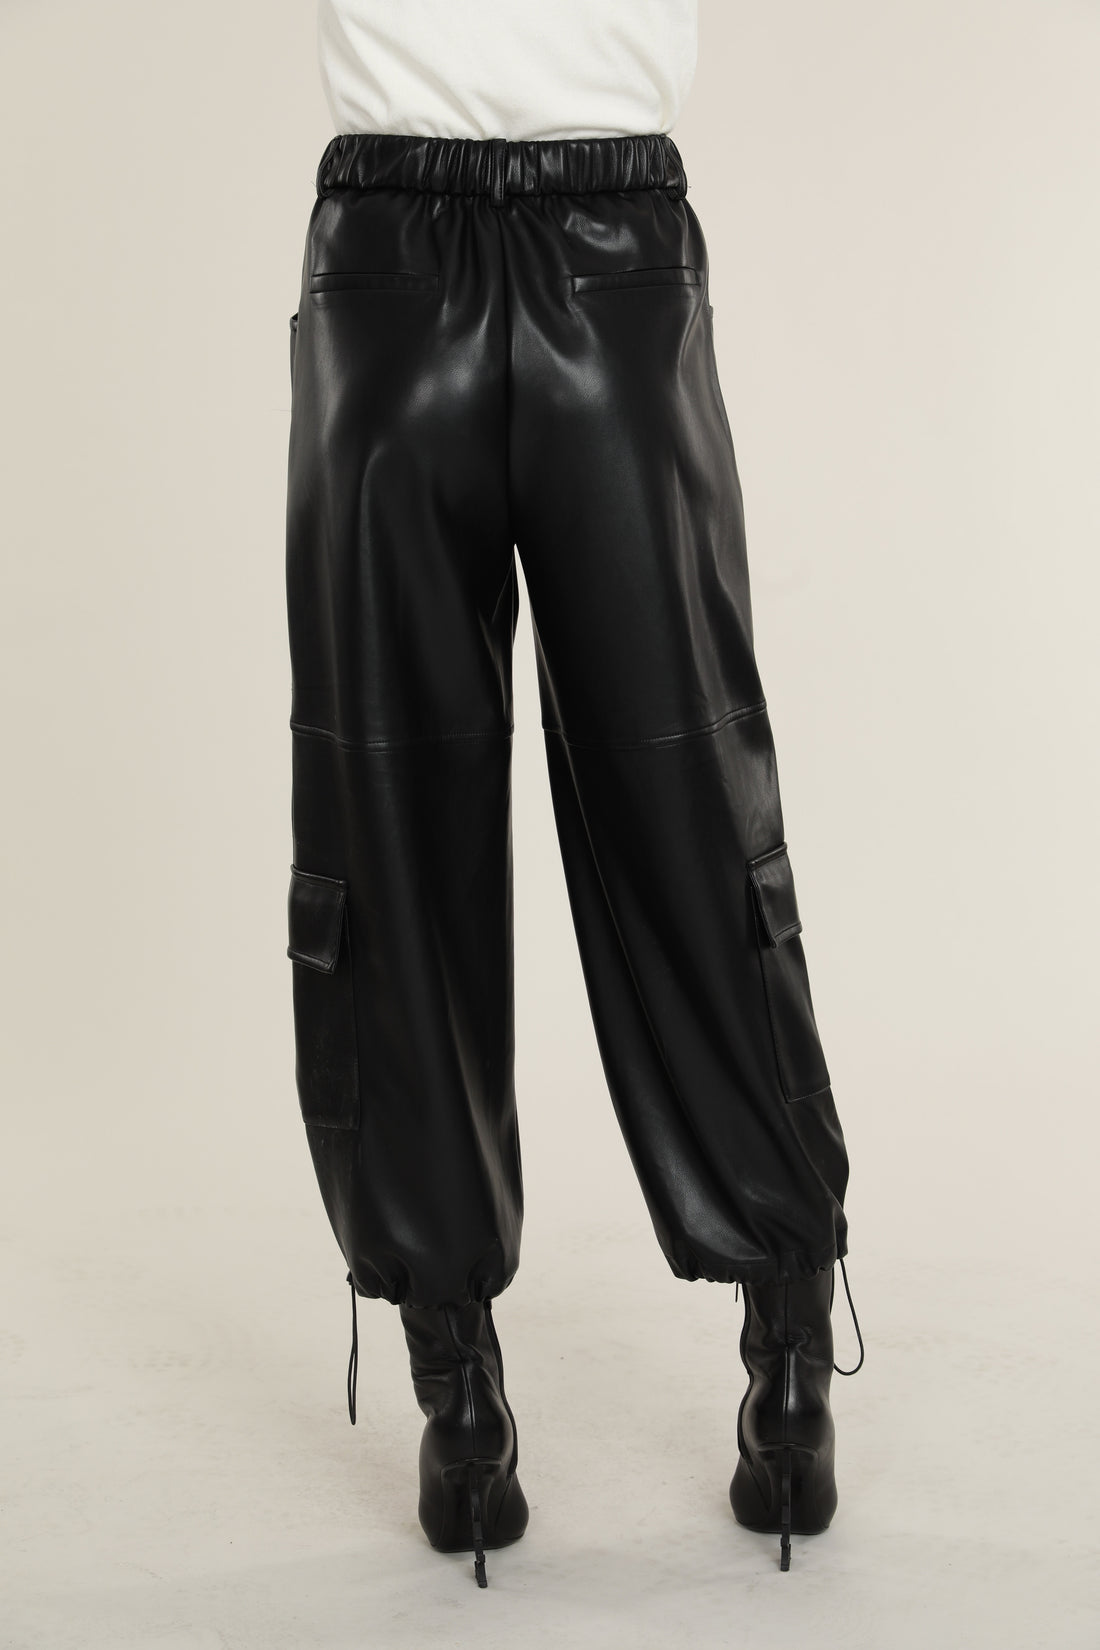 Black Vegan Leather Cargo Pants with Ankle Tie